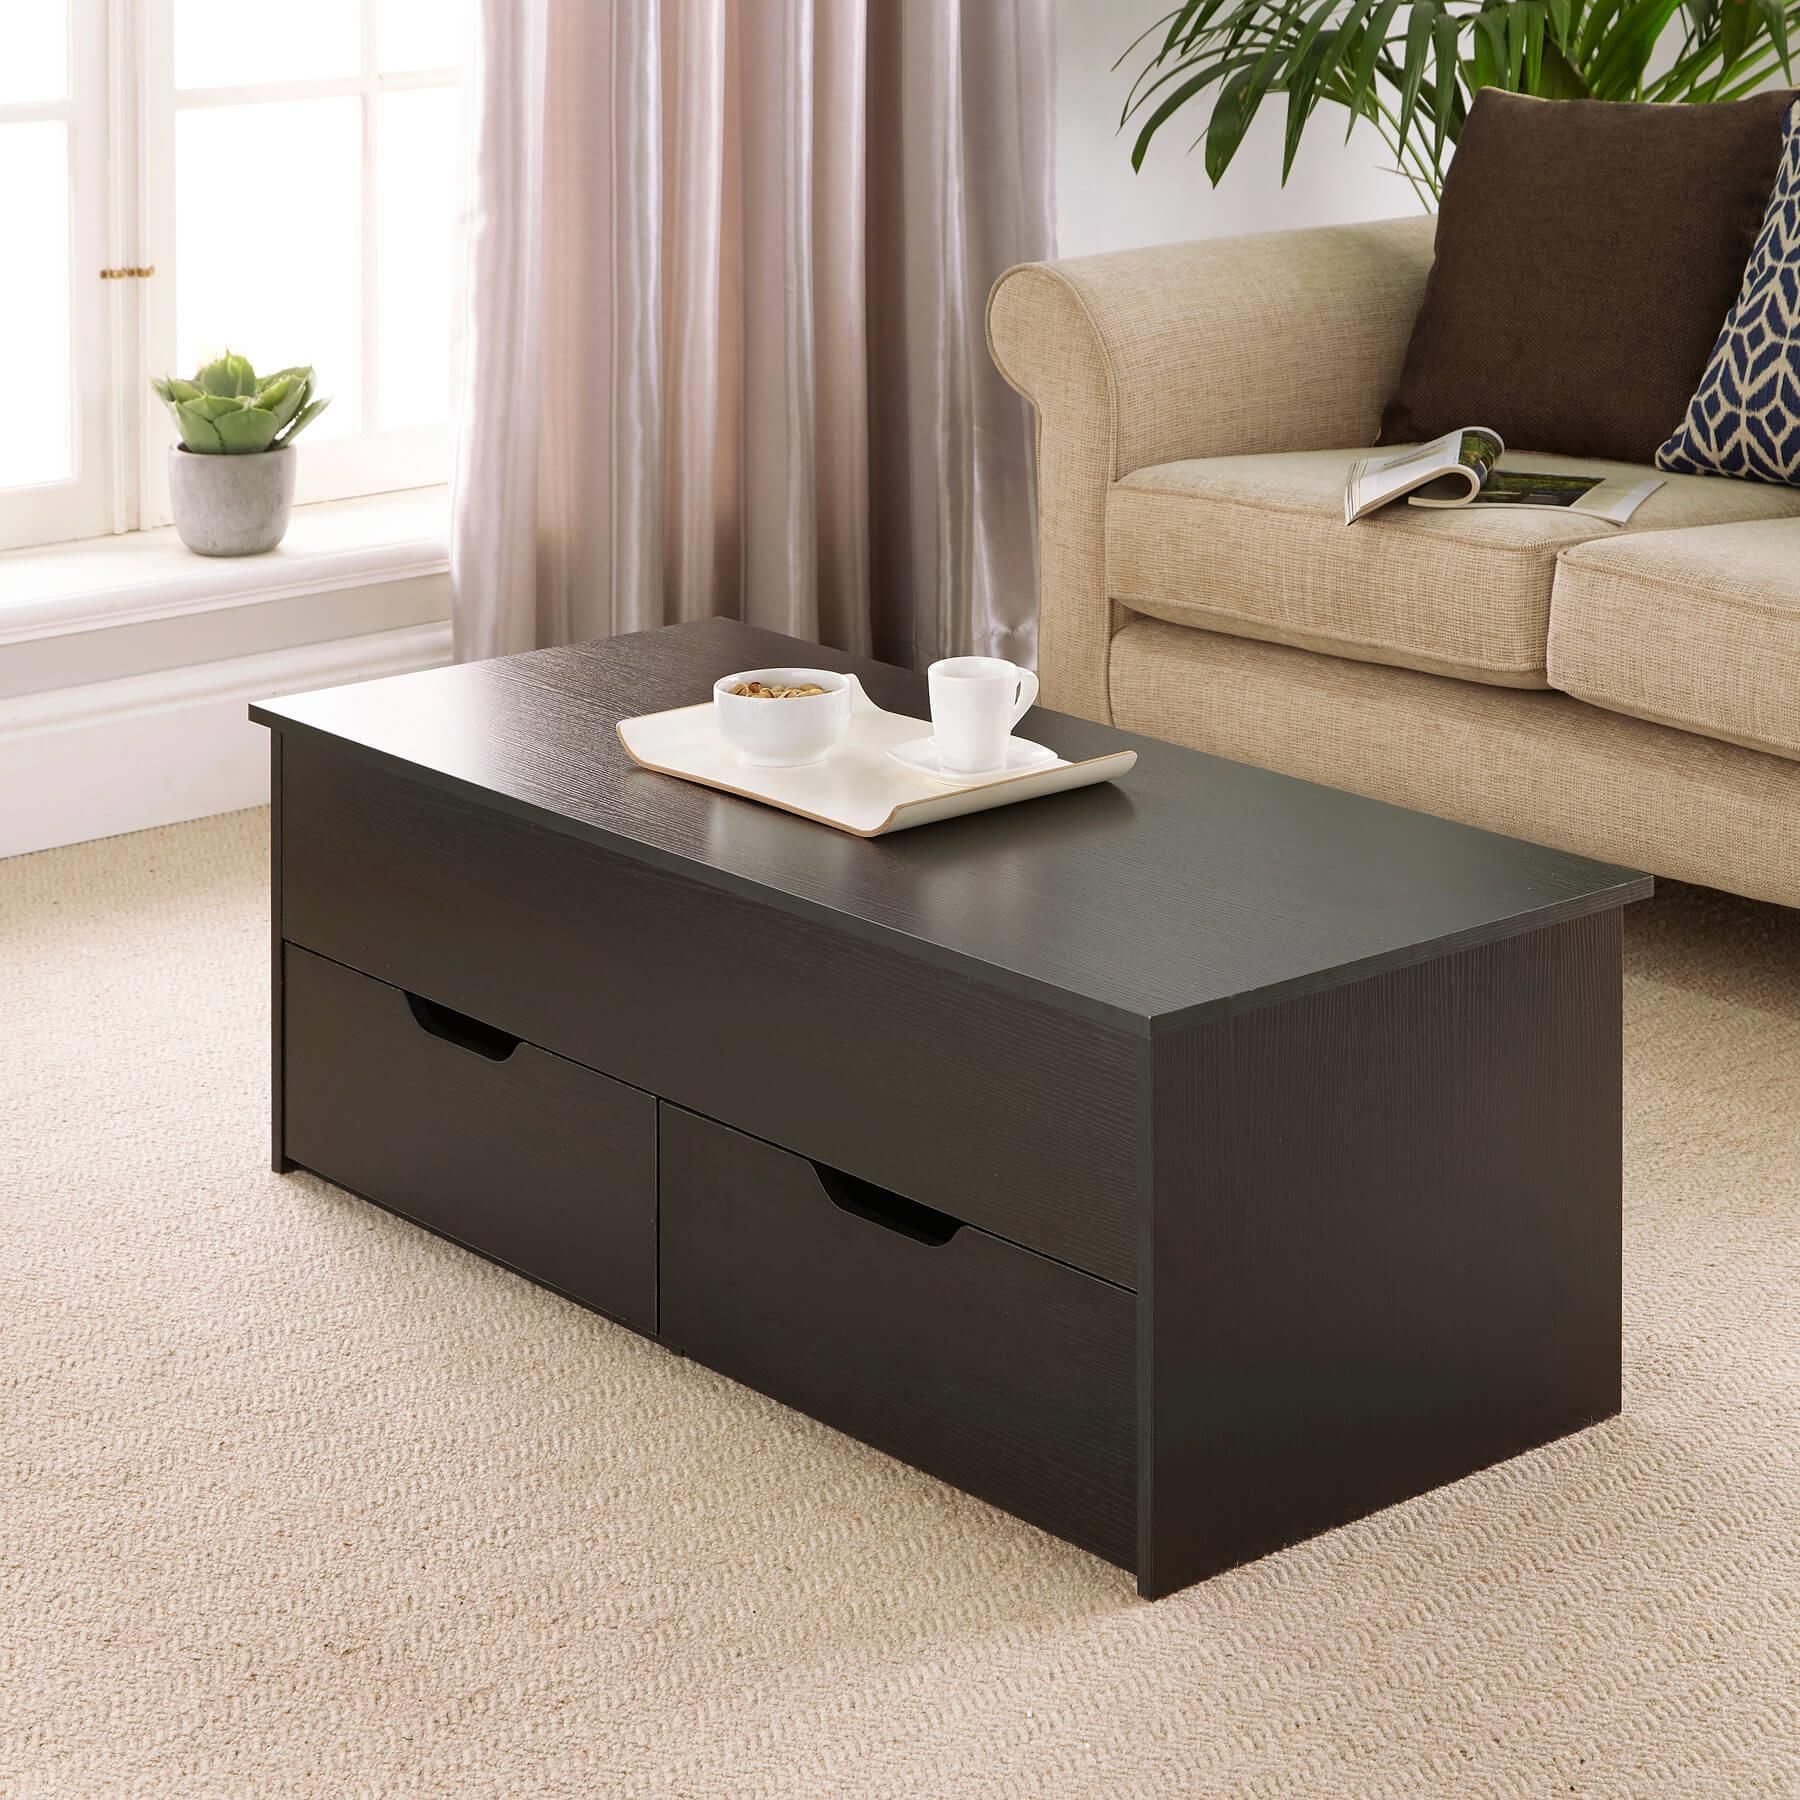 Black Wooden Coffee Table With Lift Up Top And 2 Large Storage Drawers For Wood Lift Top Coffee Tables (View 19 of 20)